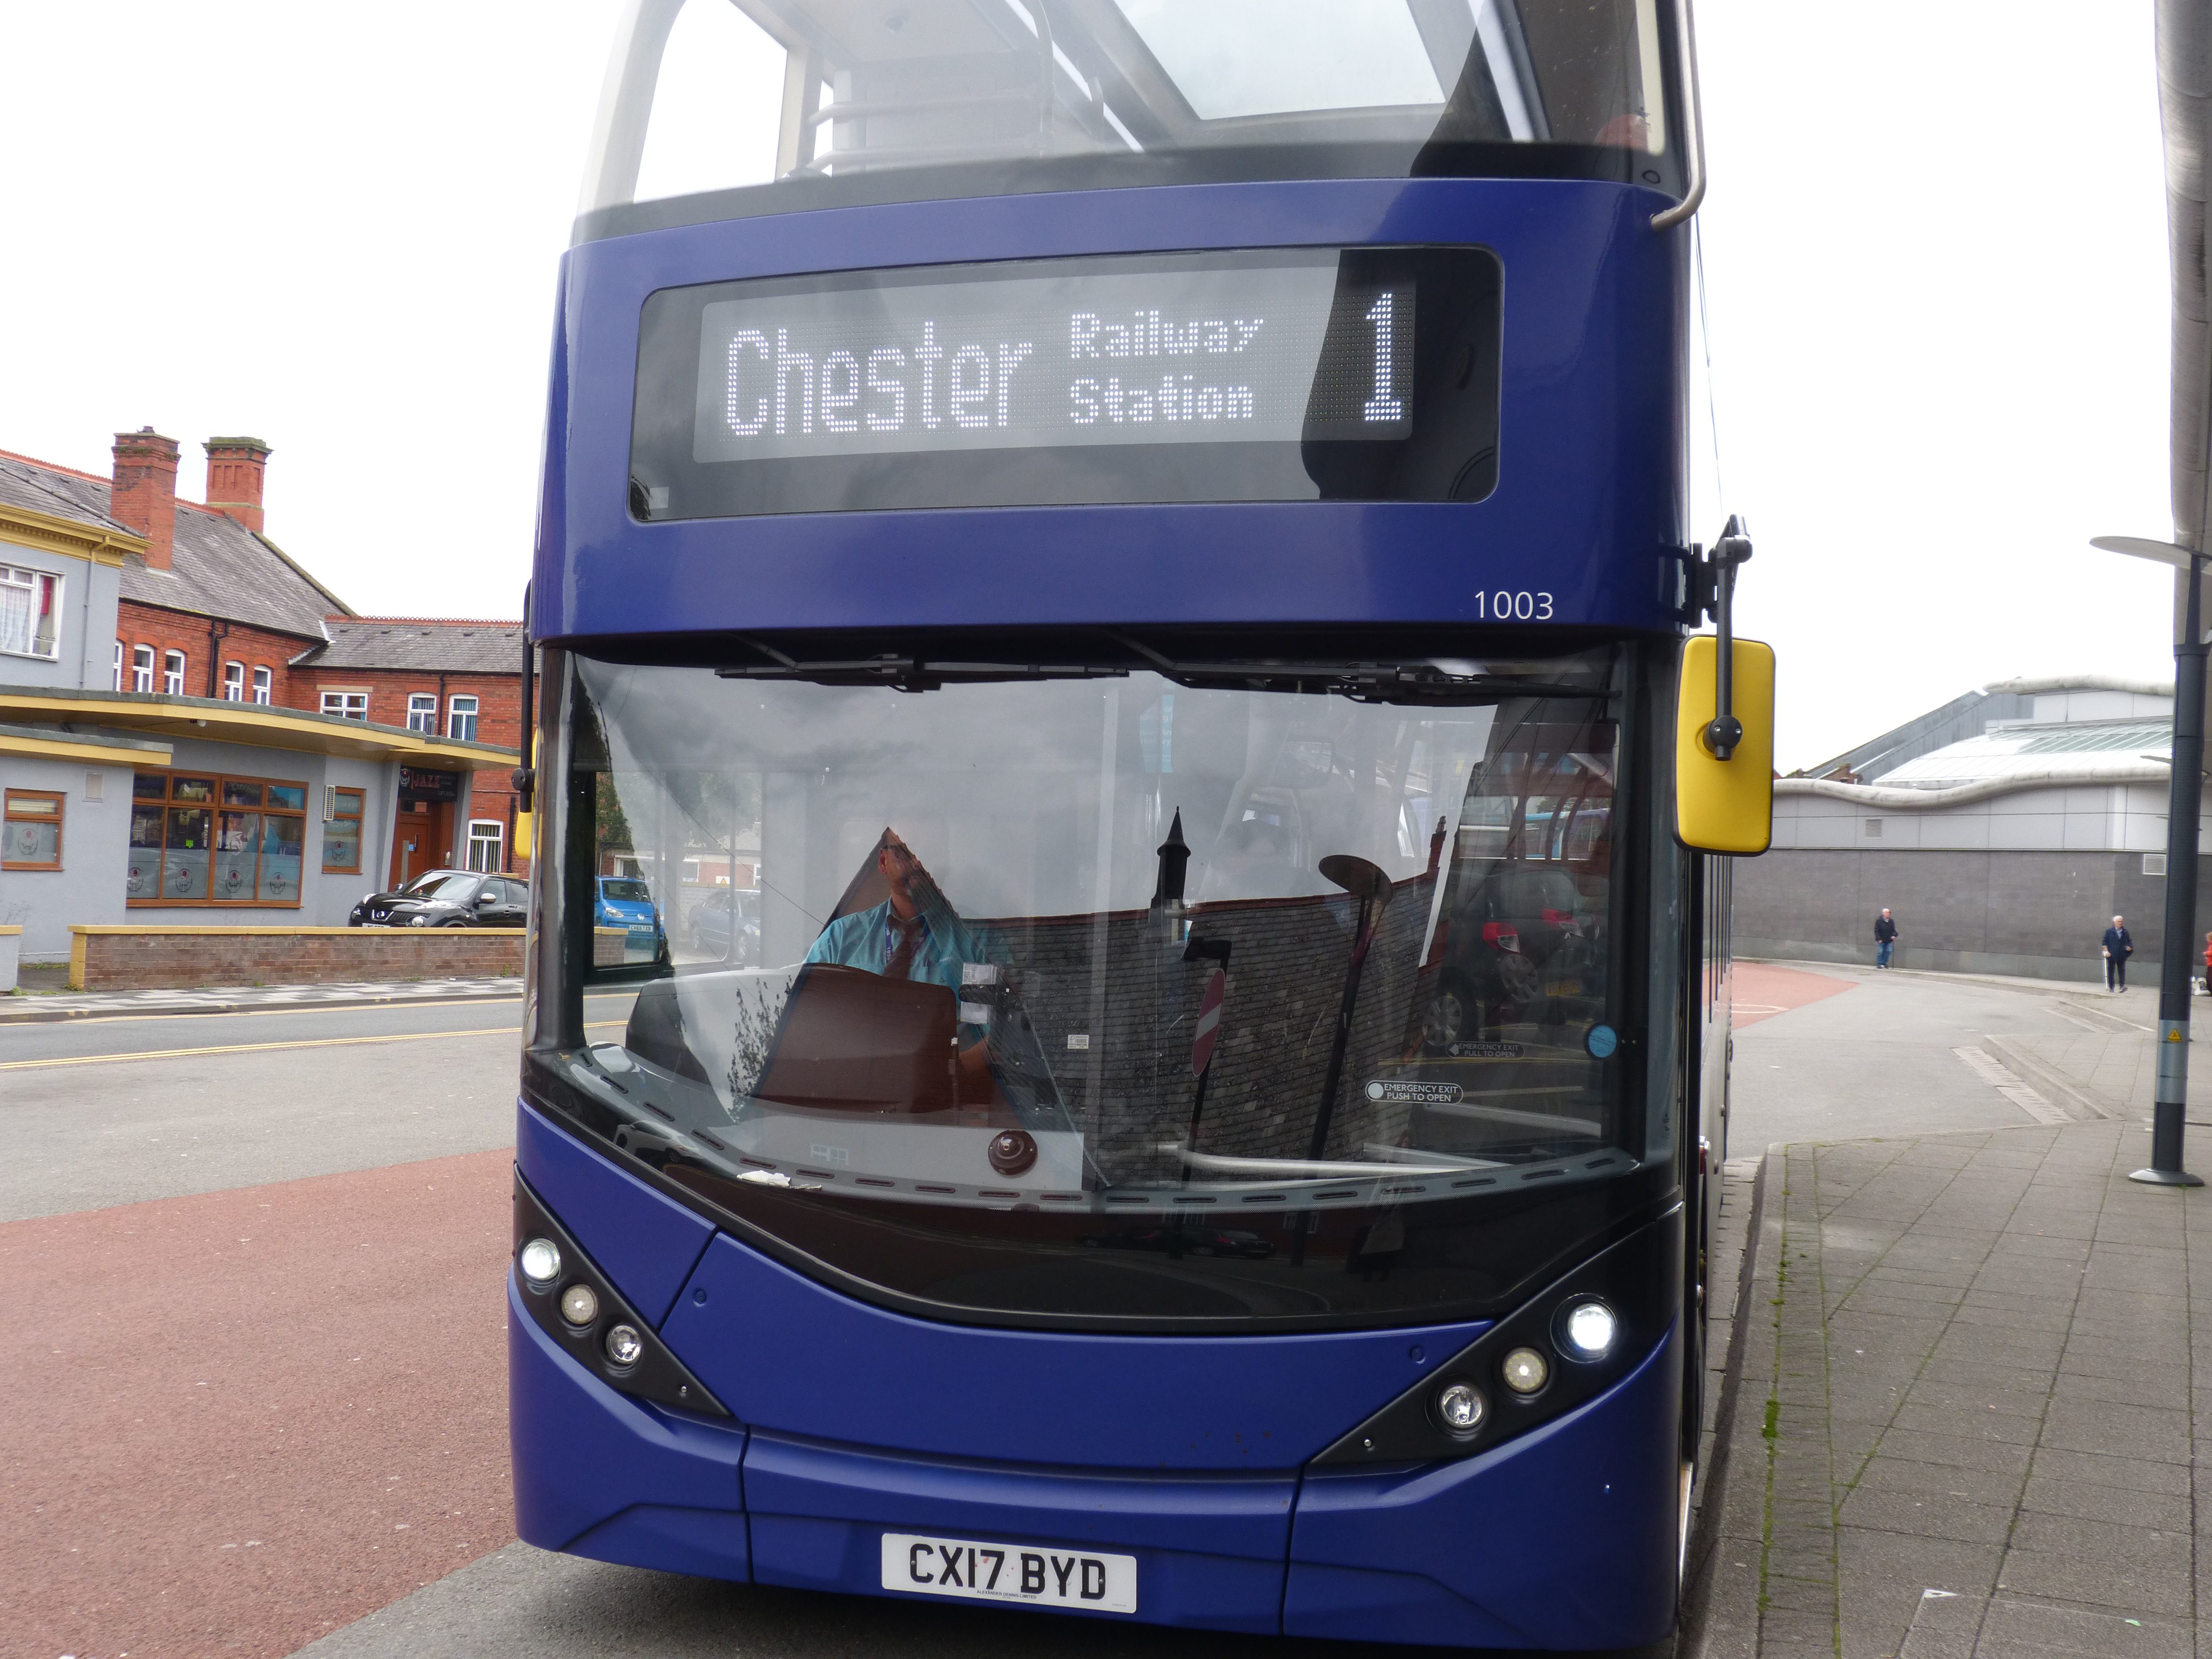 Updated 28.06.19 - Gresford Roundabout works - Changes to Arriva No 1 Service